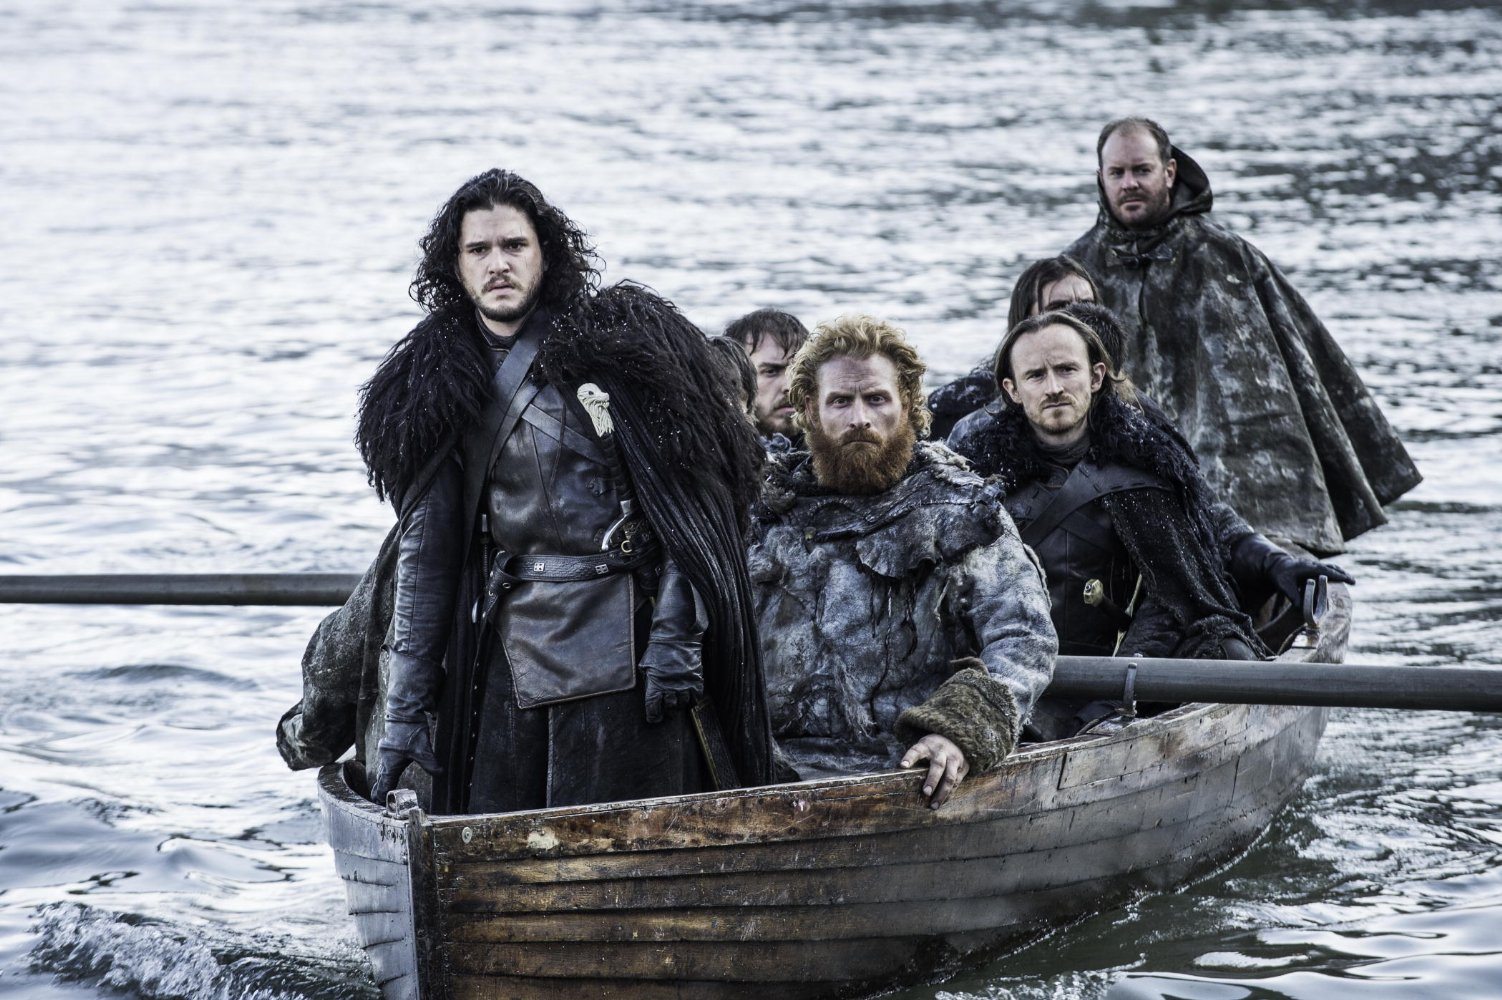 Jon Snow on a boat with several other men